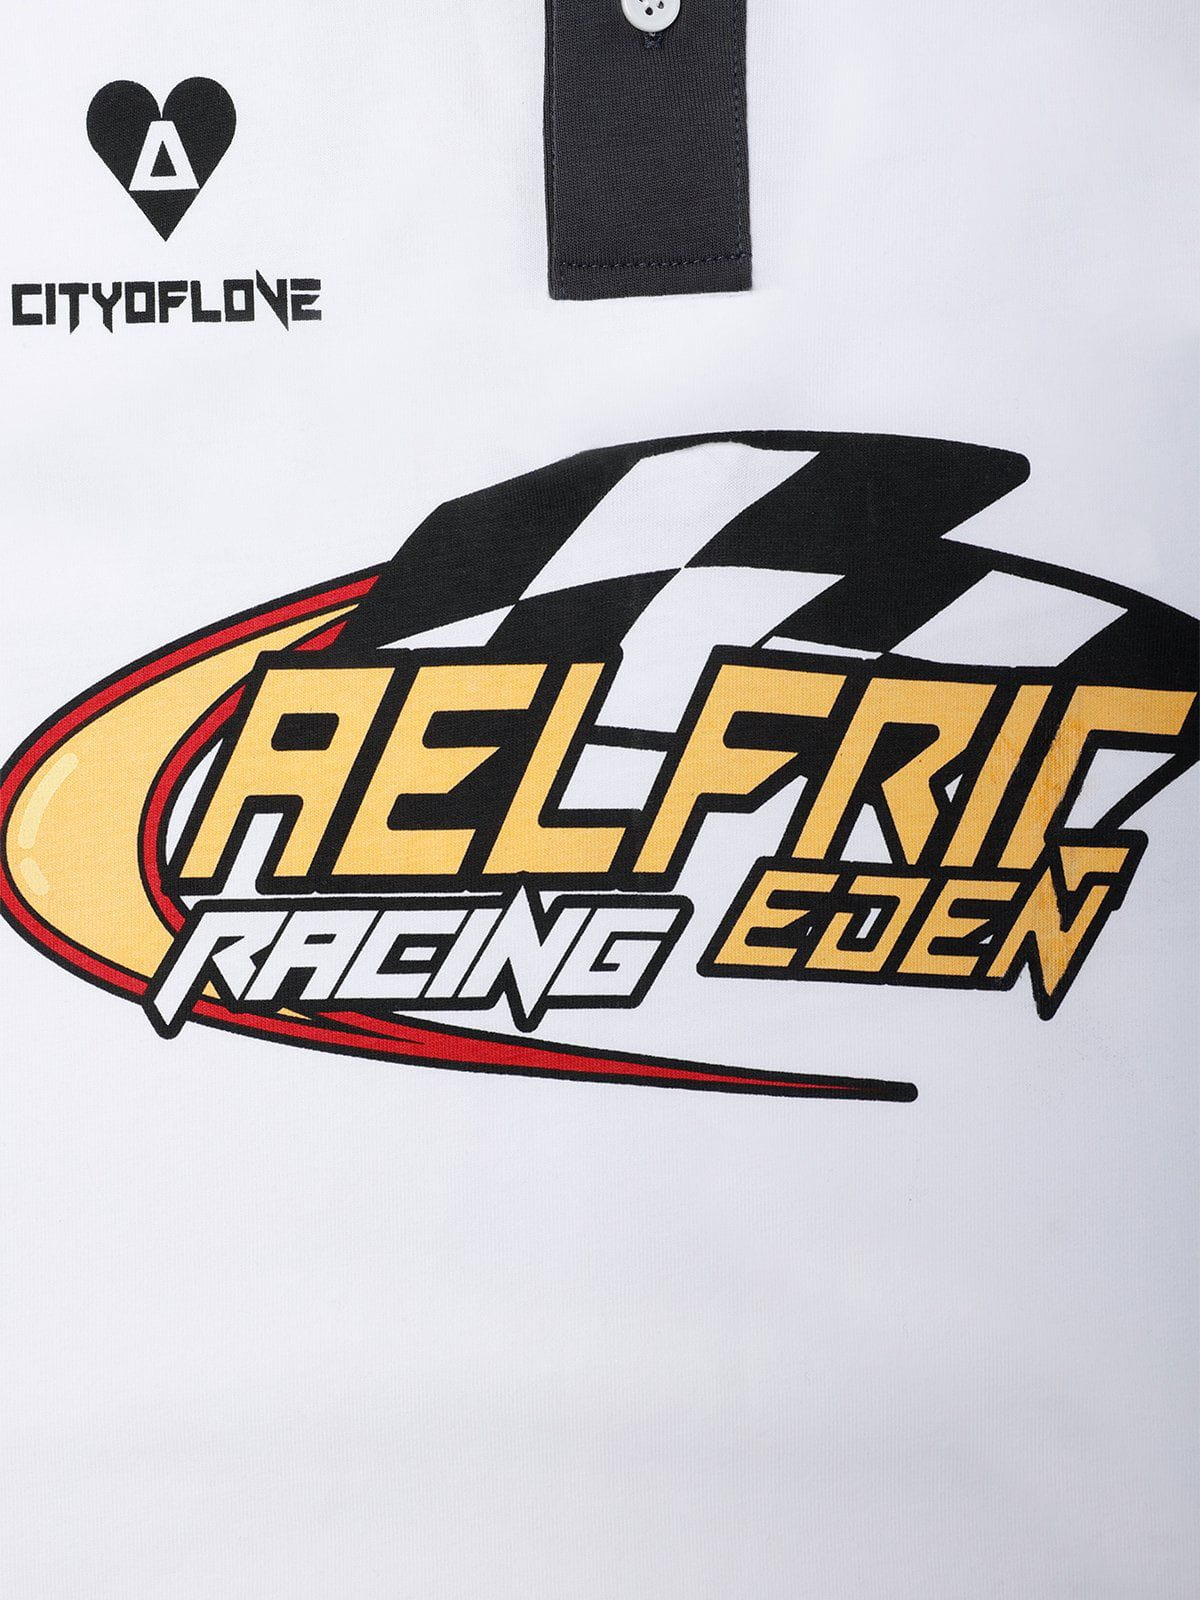 Aelfric Eden Racing Print Polo Tee<font color=